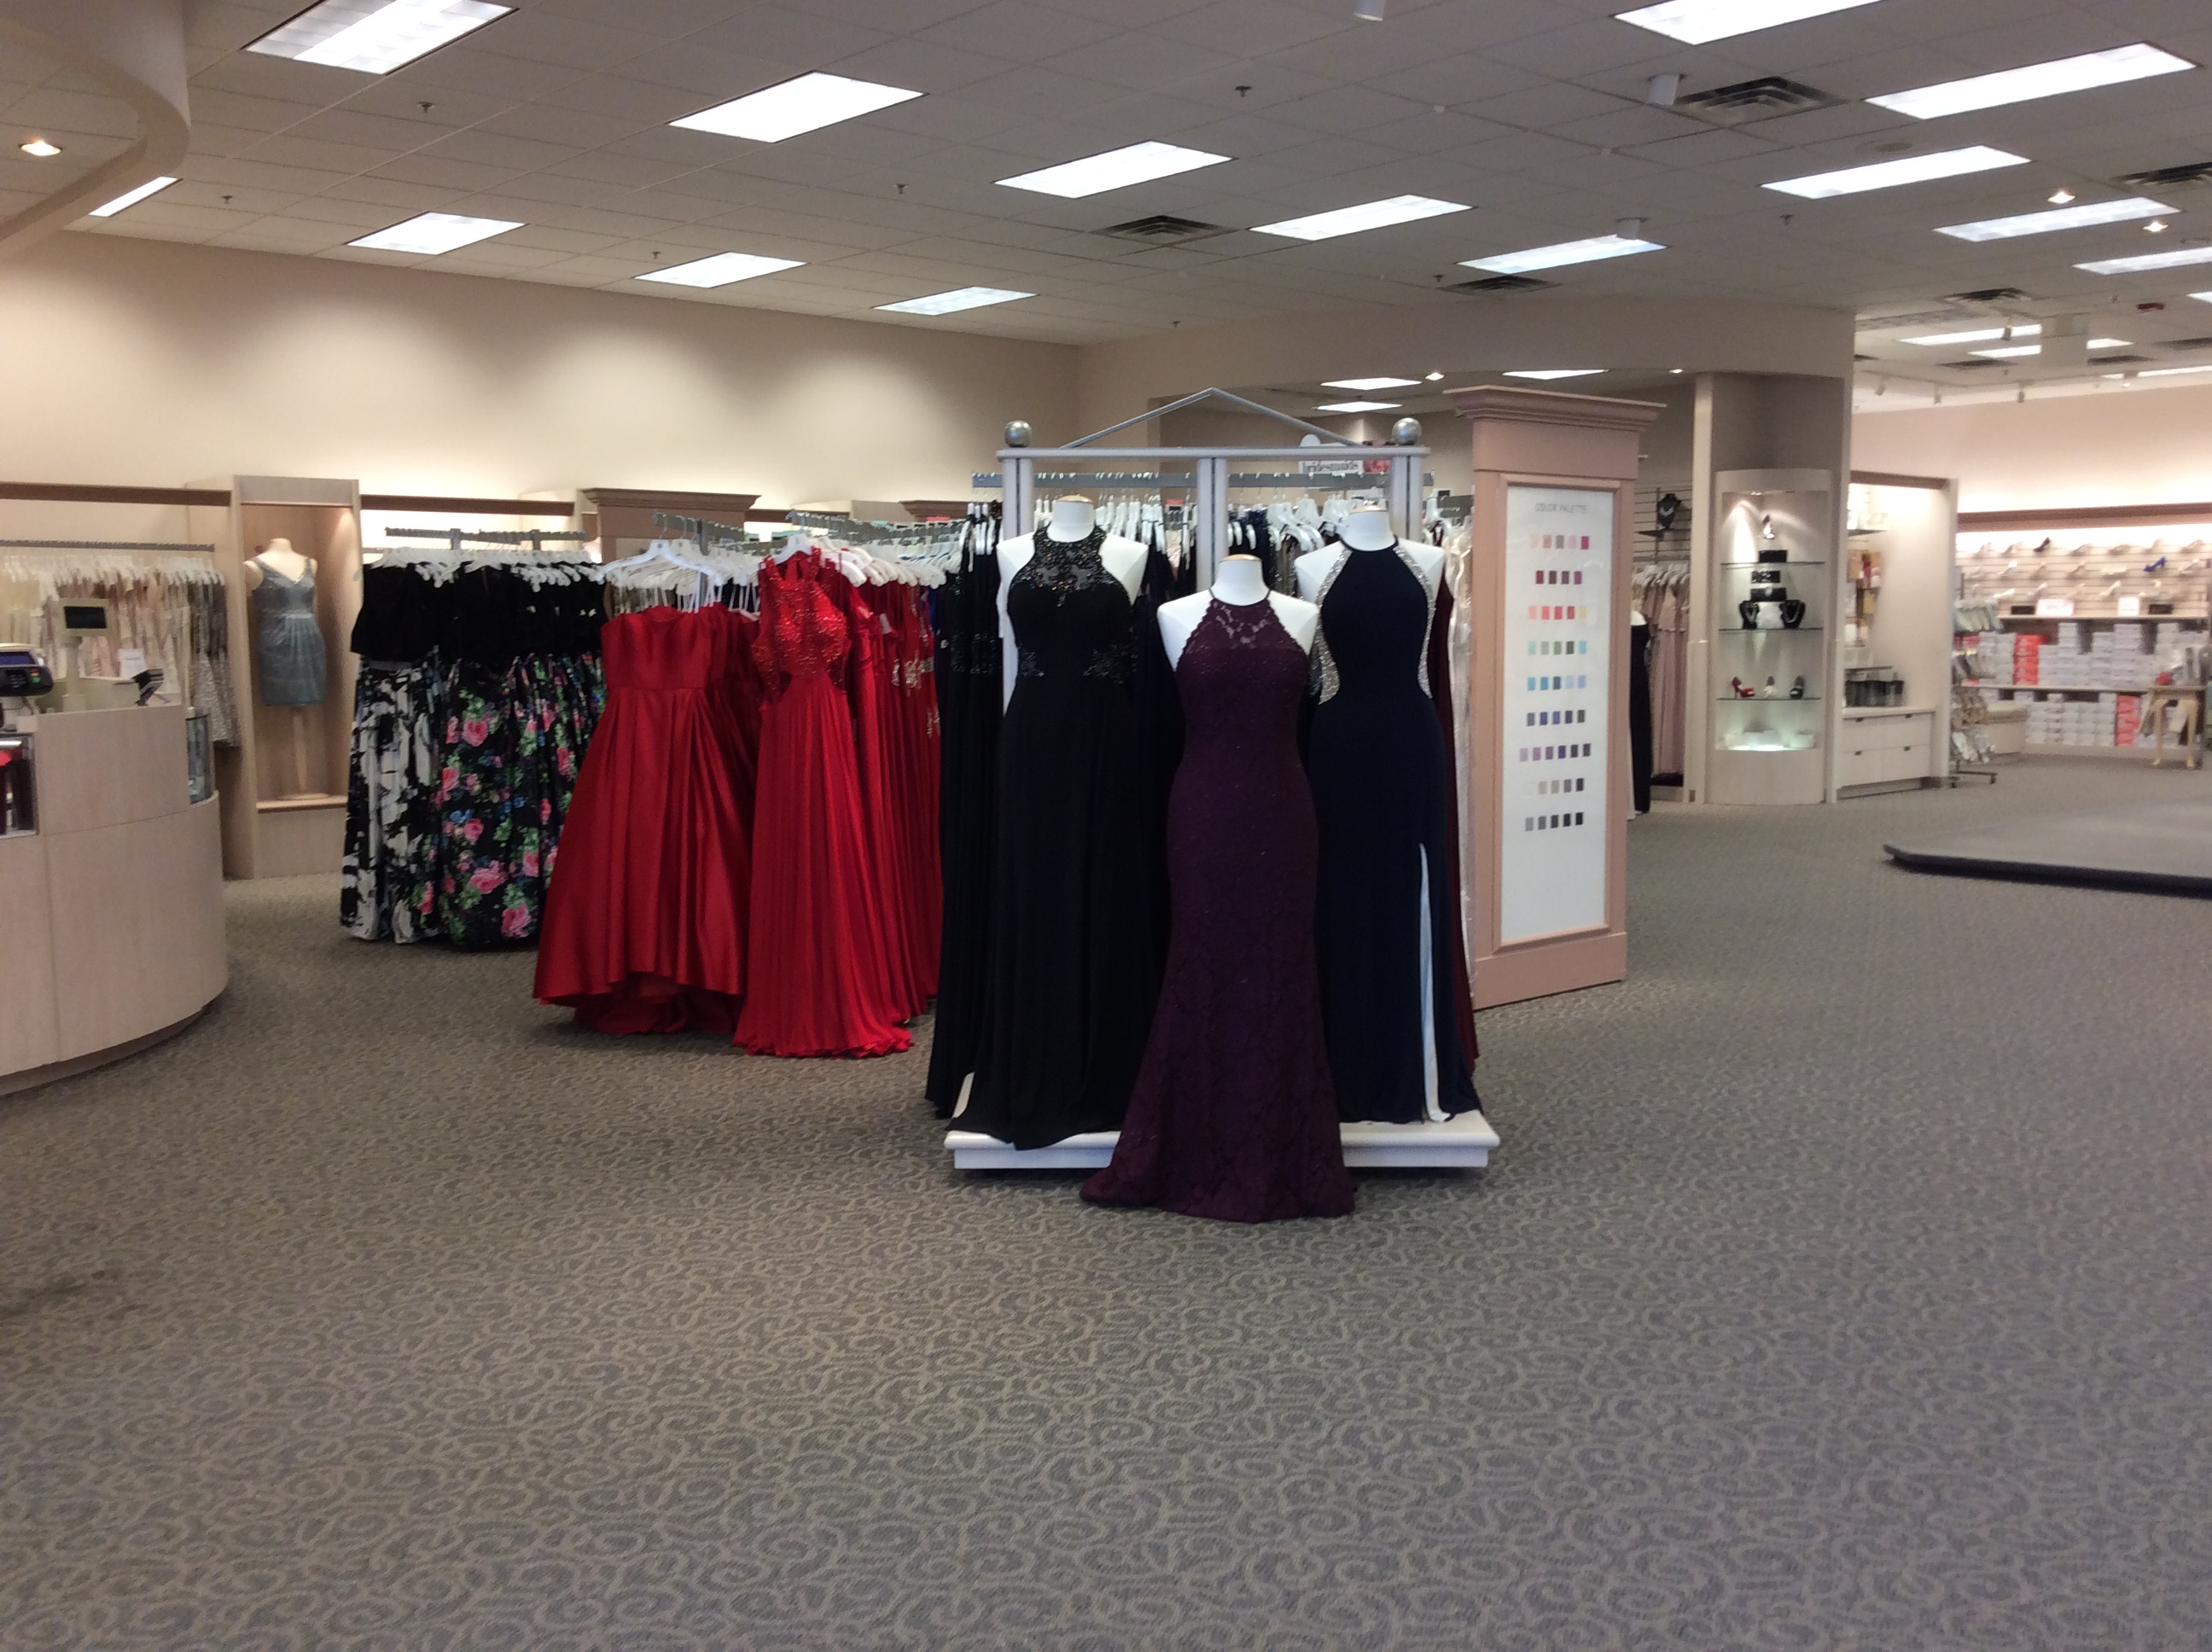 David’s Bridal 17231 Cole Rd, Hagerstown, MD 21740 - YP.com